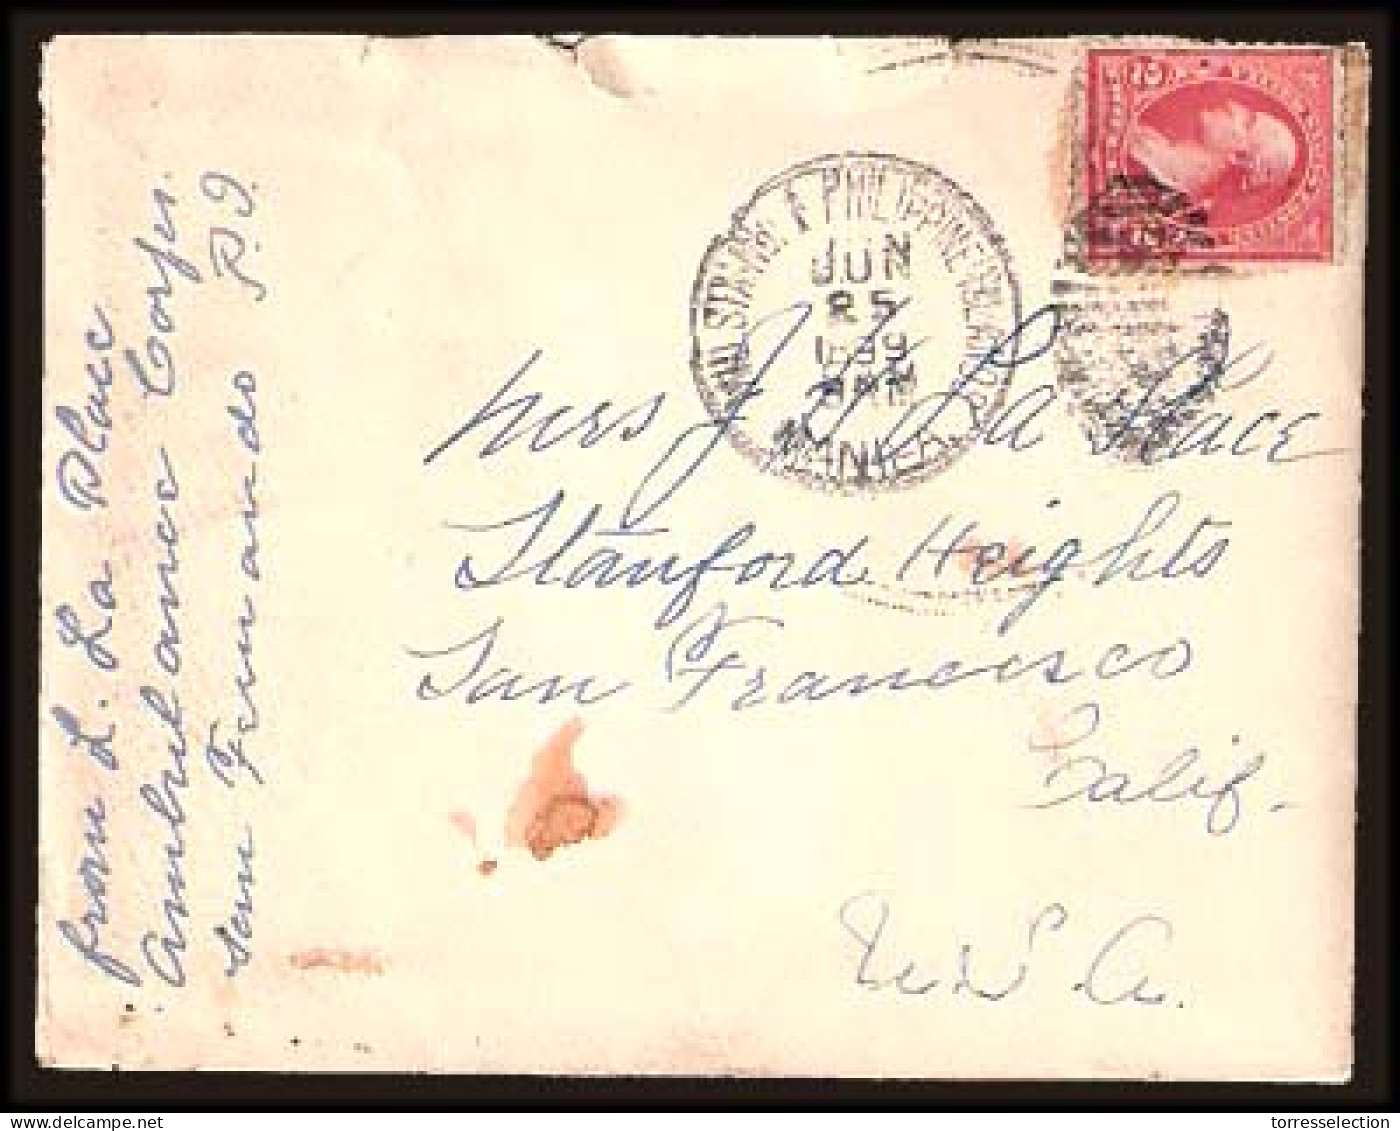 PHILIPPINES. 1899 (June 25). Manila - USA. Soldiers Letter With Contains. "Ambulance Corps". Very Rare. Shows Excellent. - Filippine